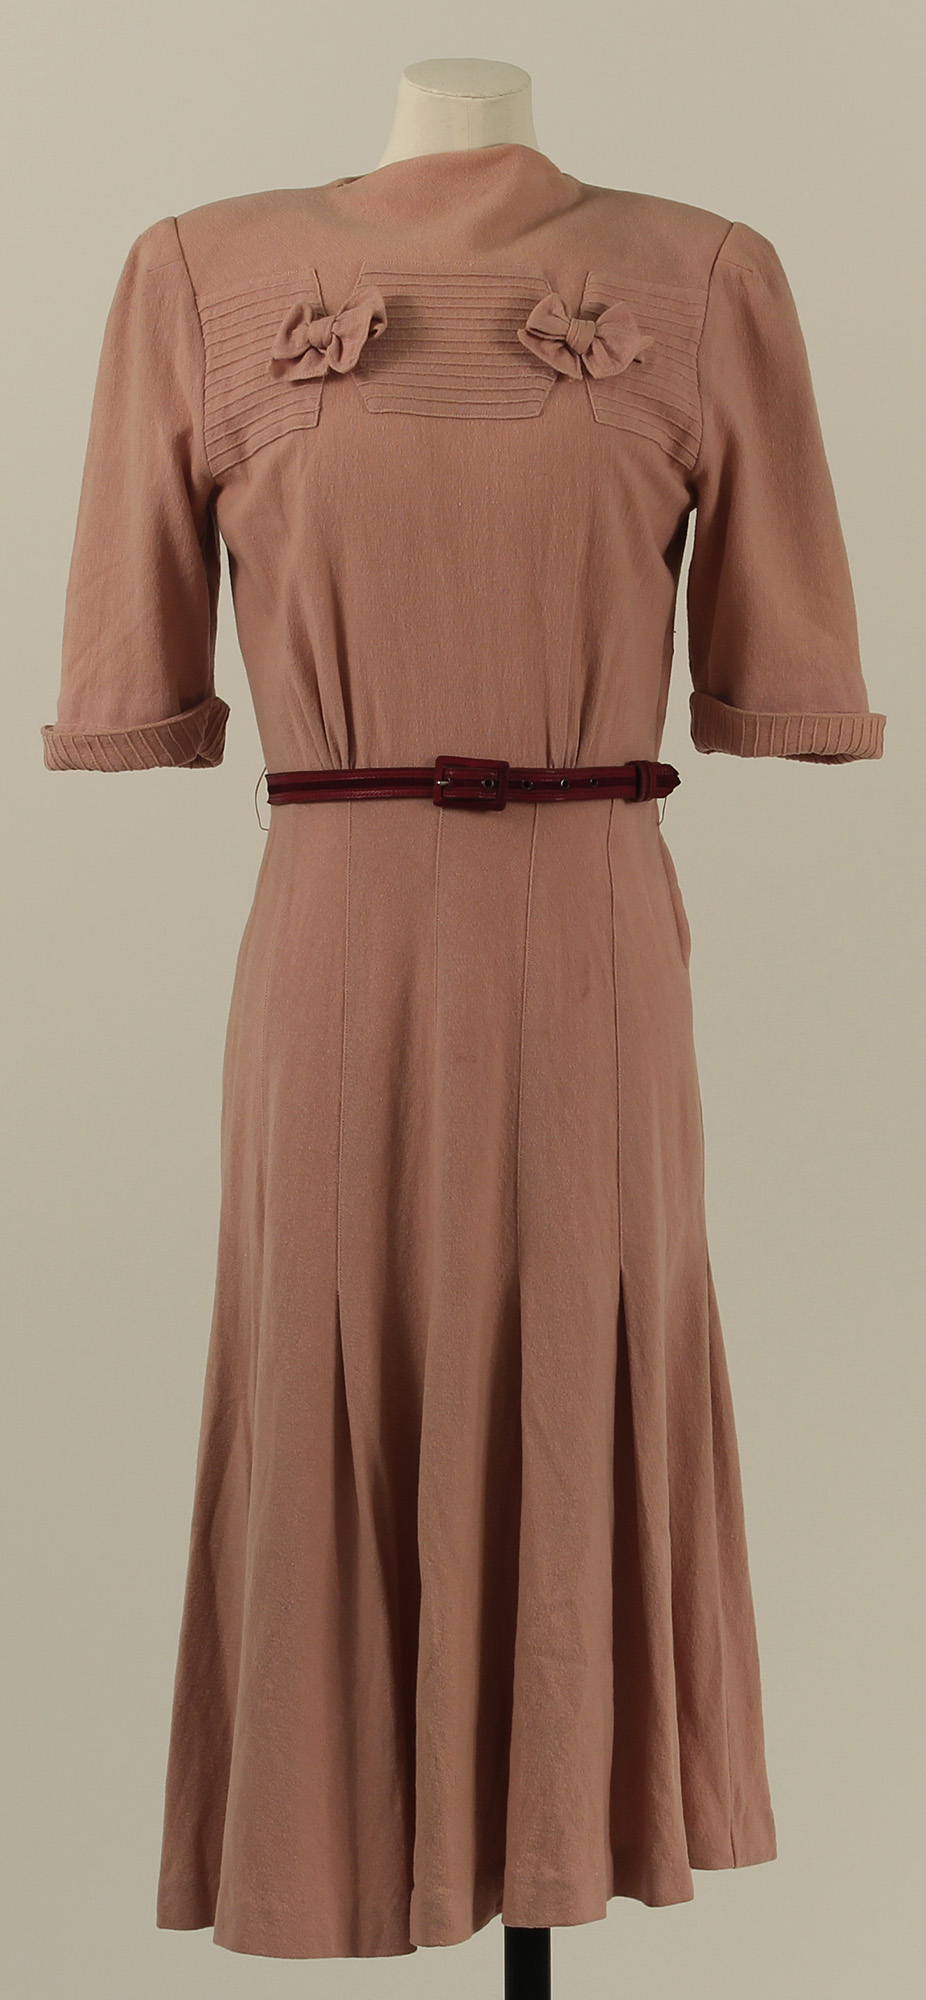 A dusty pink dress in typical 1940s style with half-length sleeves, a cinched waist and a pleated skirt falling a little below the knee